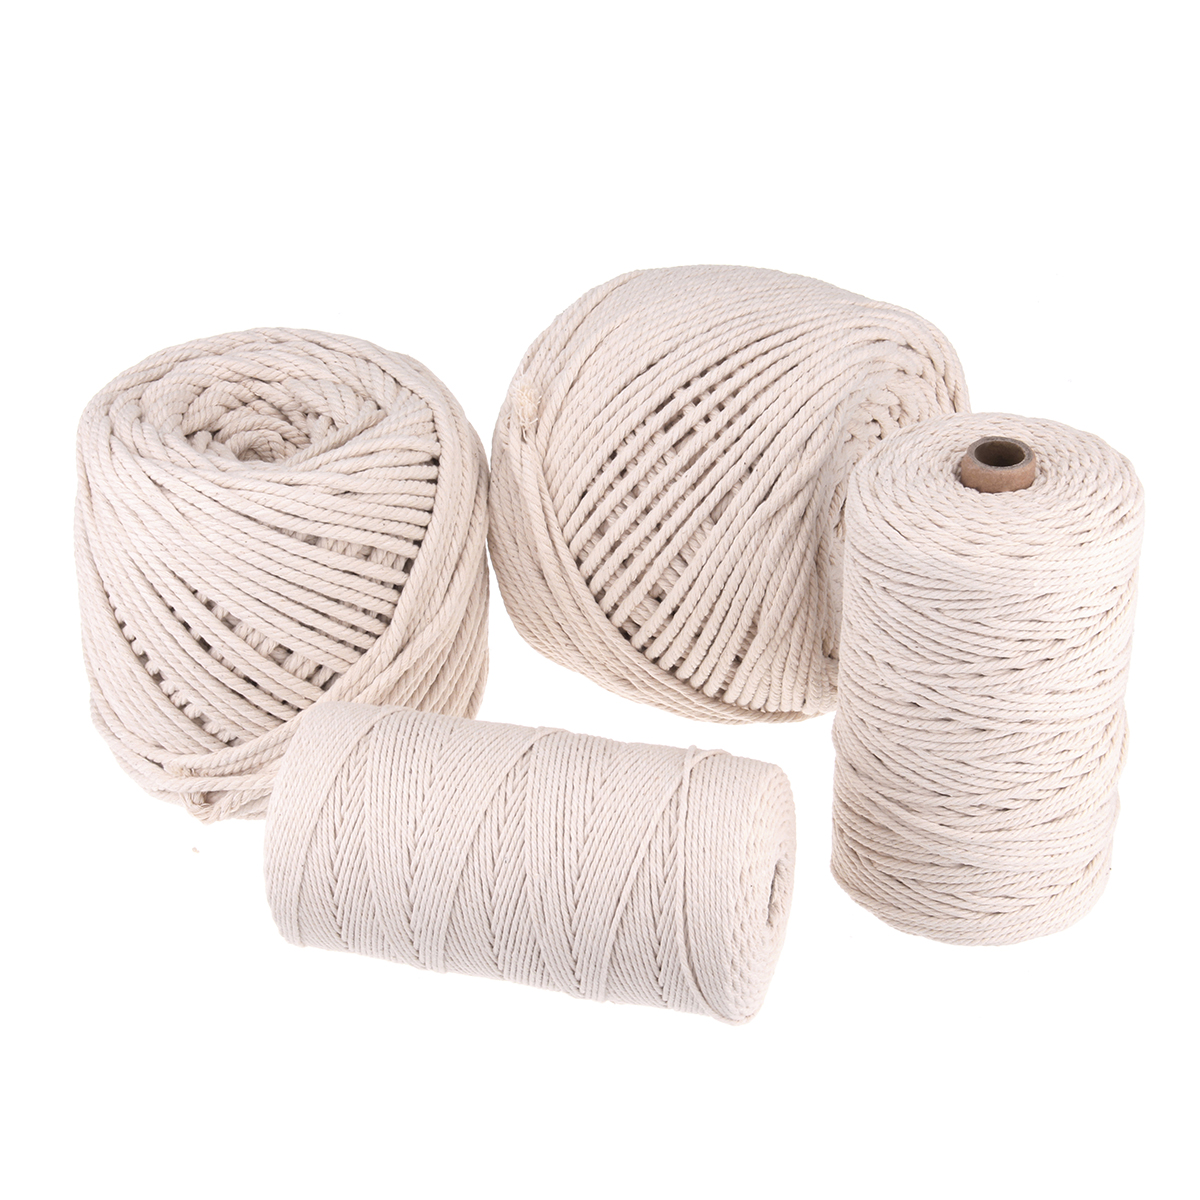 

2-5mm Cotton String Twisted Cord Crafting Macrame Rope Decor Hand Braided Wire